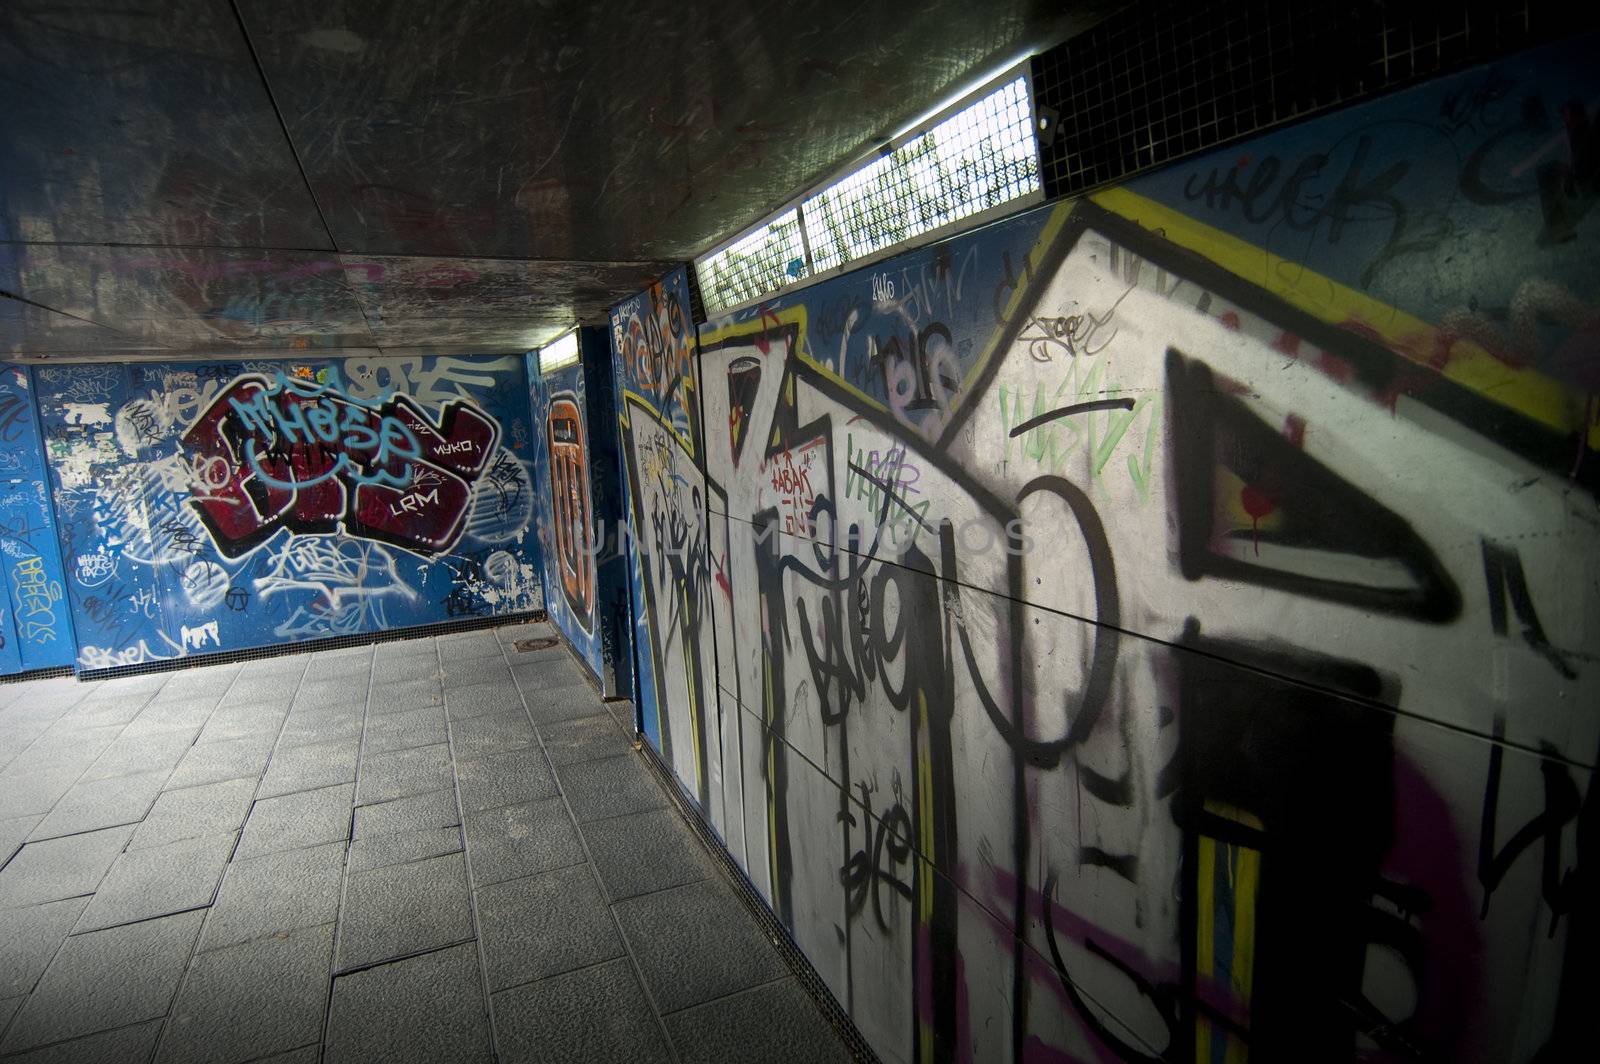 A tunnel with many graffiti painted on walls